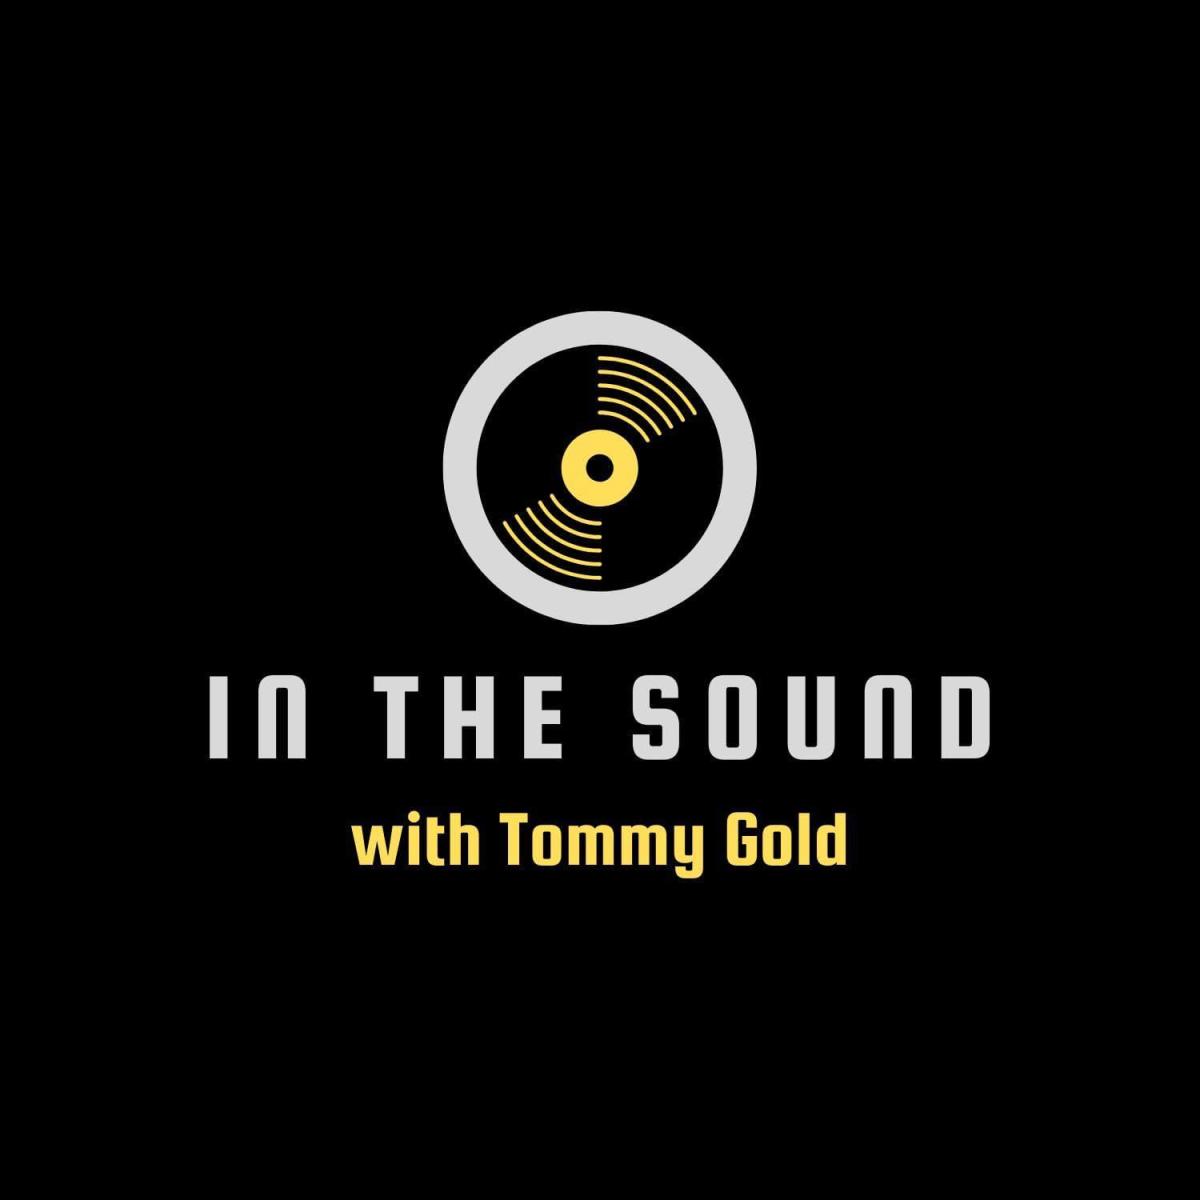 In the Sound with Tommy Gold